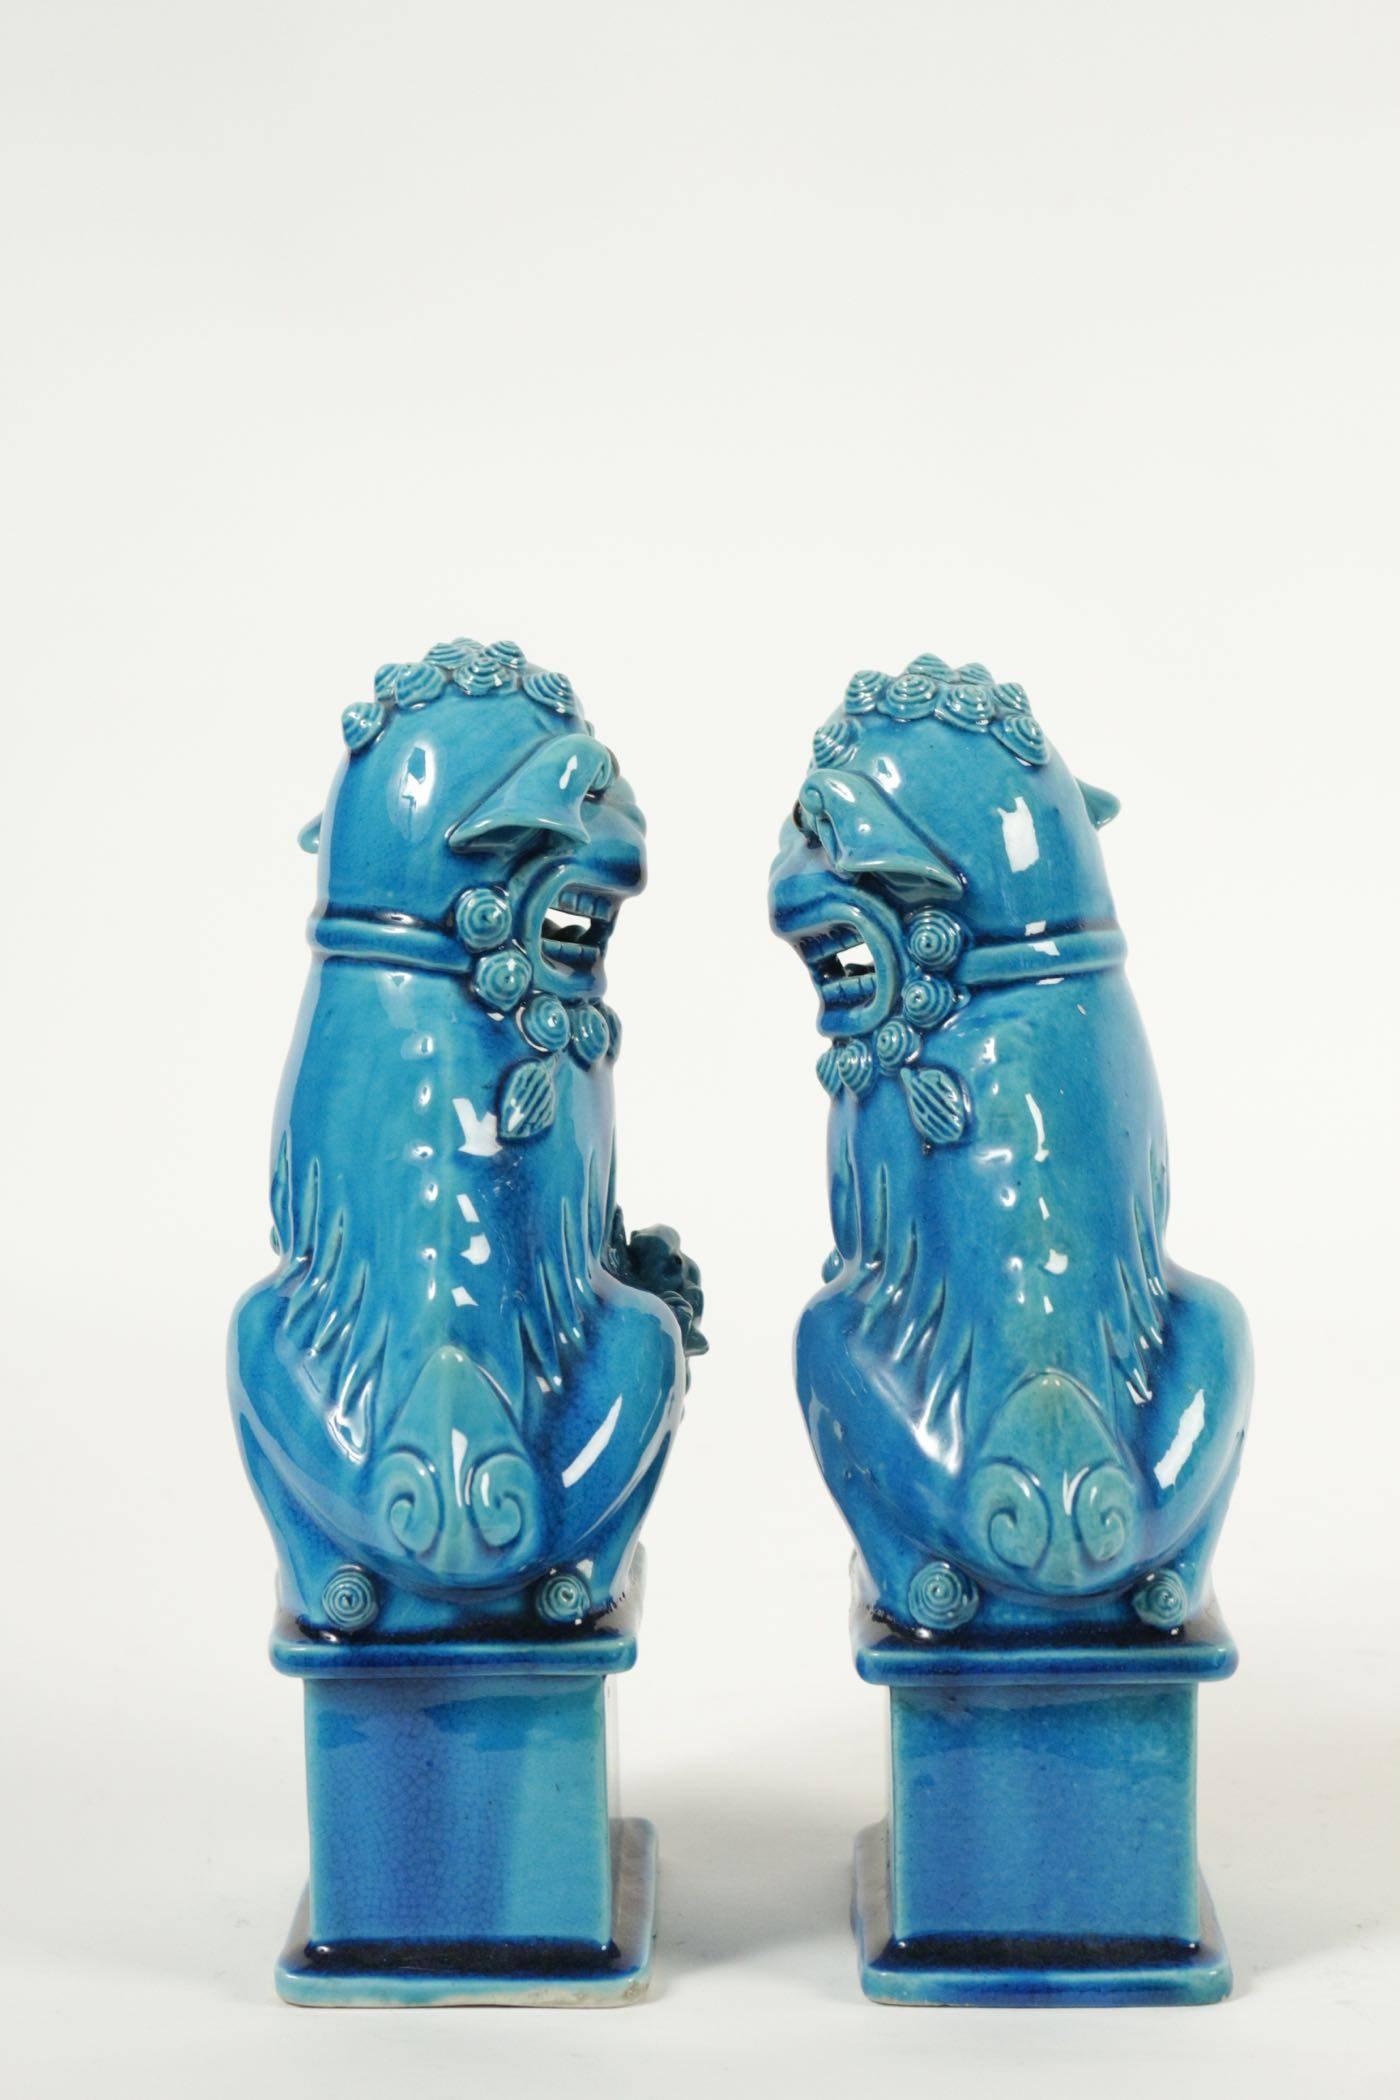 Early 20th Century Paire of Turquoise Porcelain and Enamel Pho Dogs, circa 1900